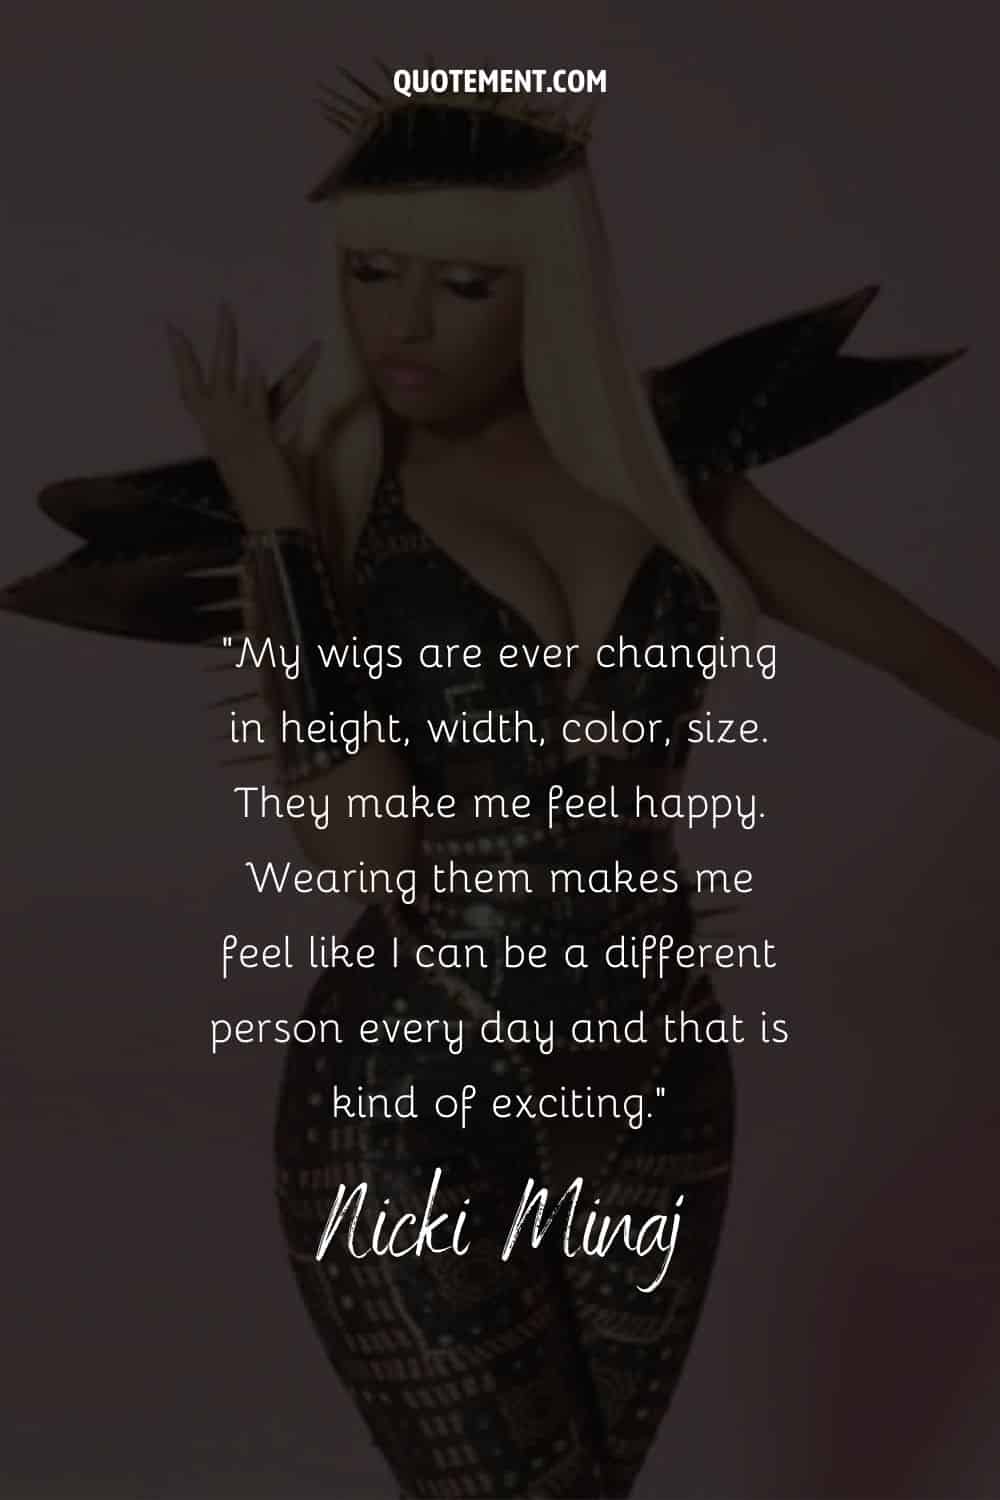 Inspirational quote on wigs by Nicki Minaj and her photo in the background